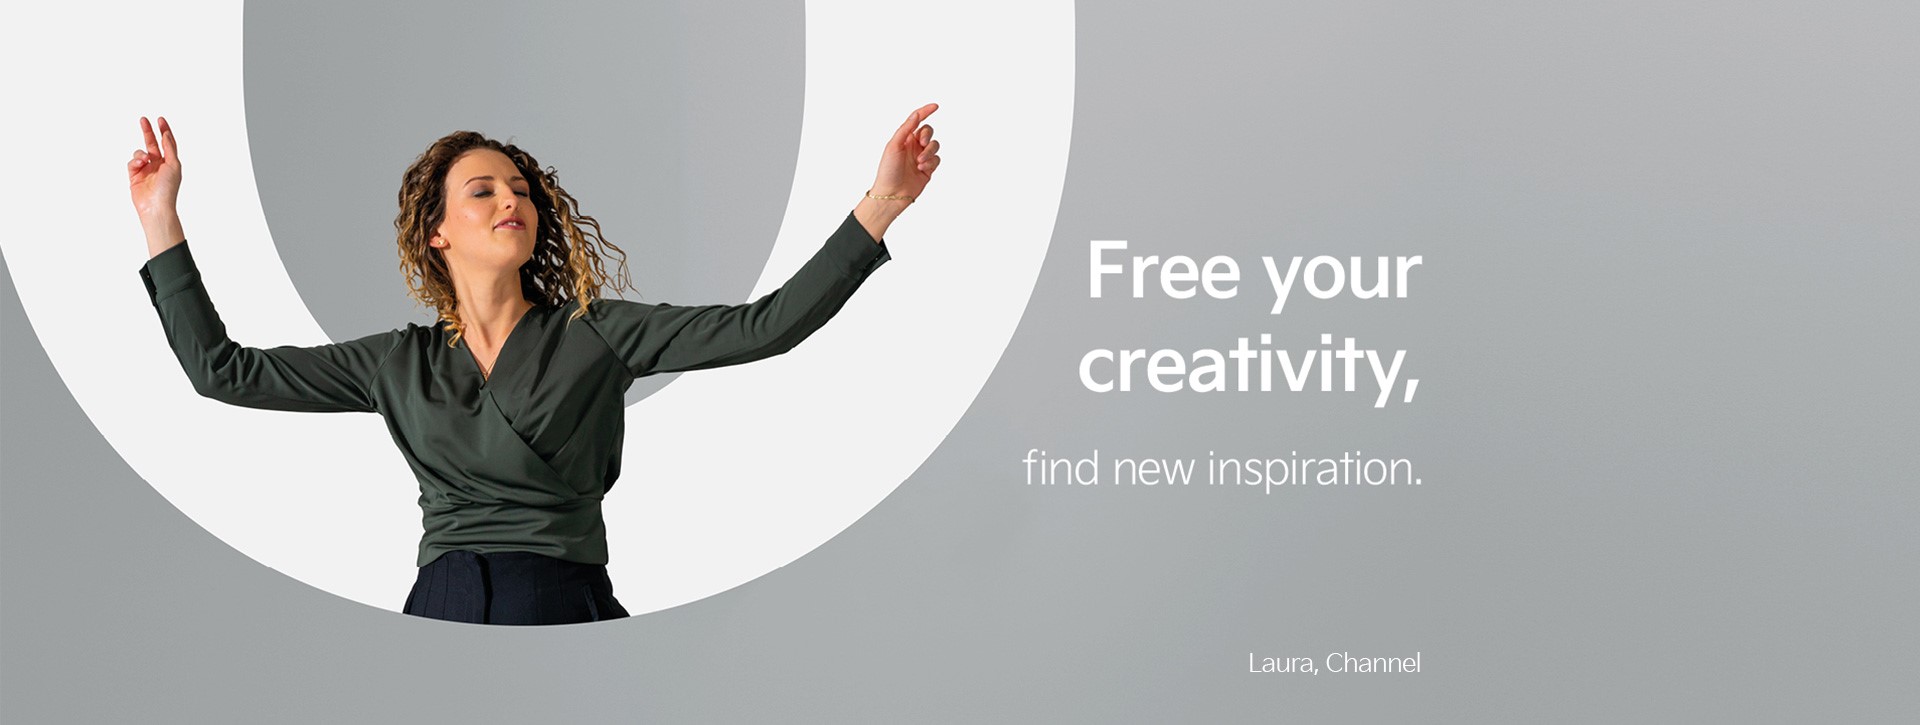 Laura from our Channel team is dancing in front of the letter "O". Next to her we find the statement "Free your creativity - find new inspiration".